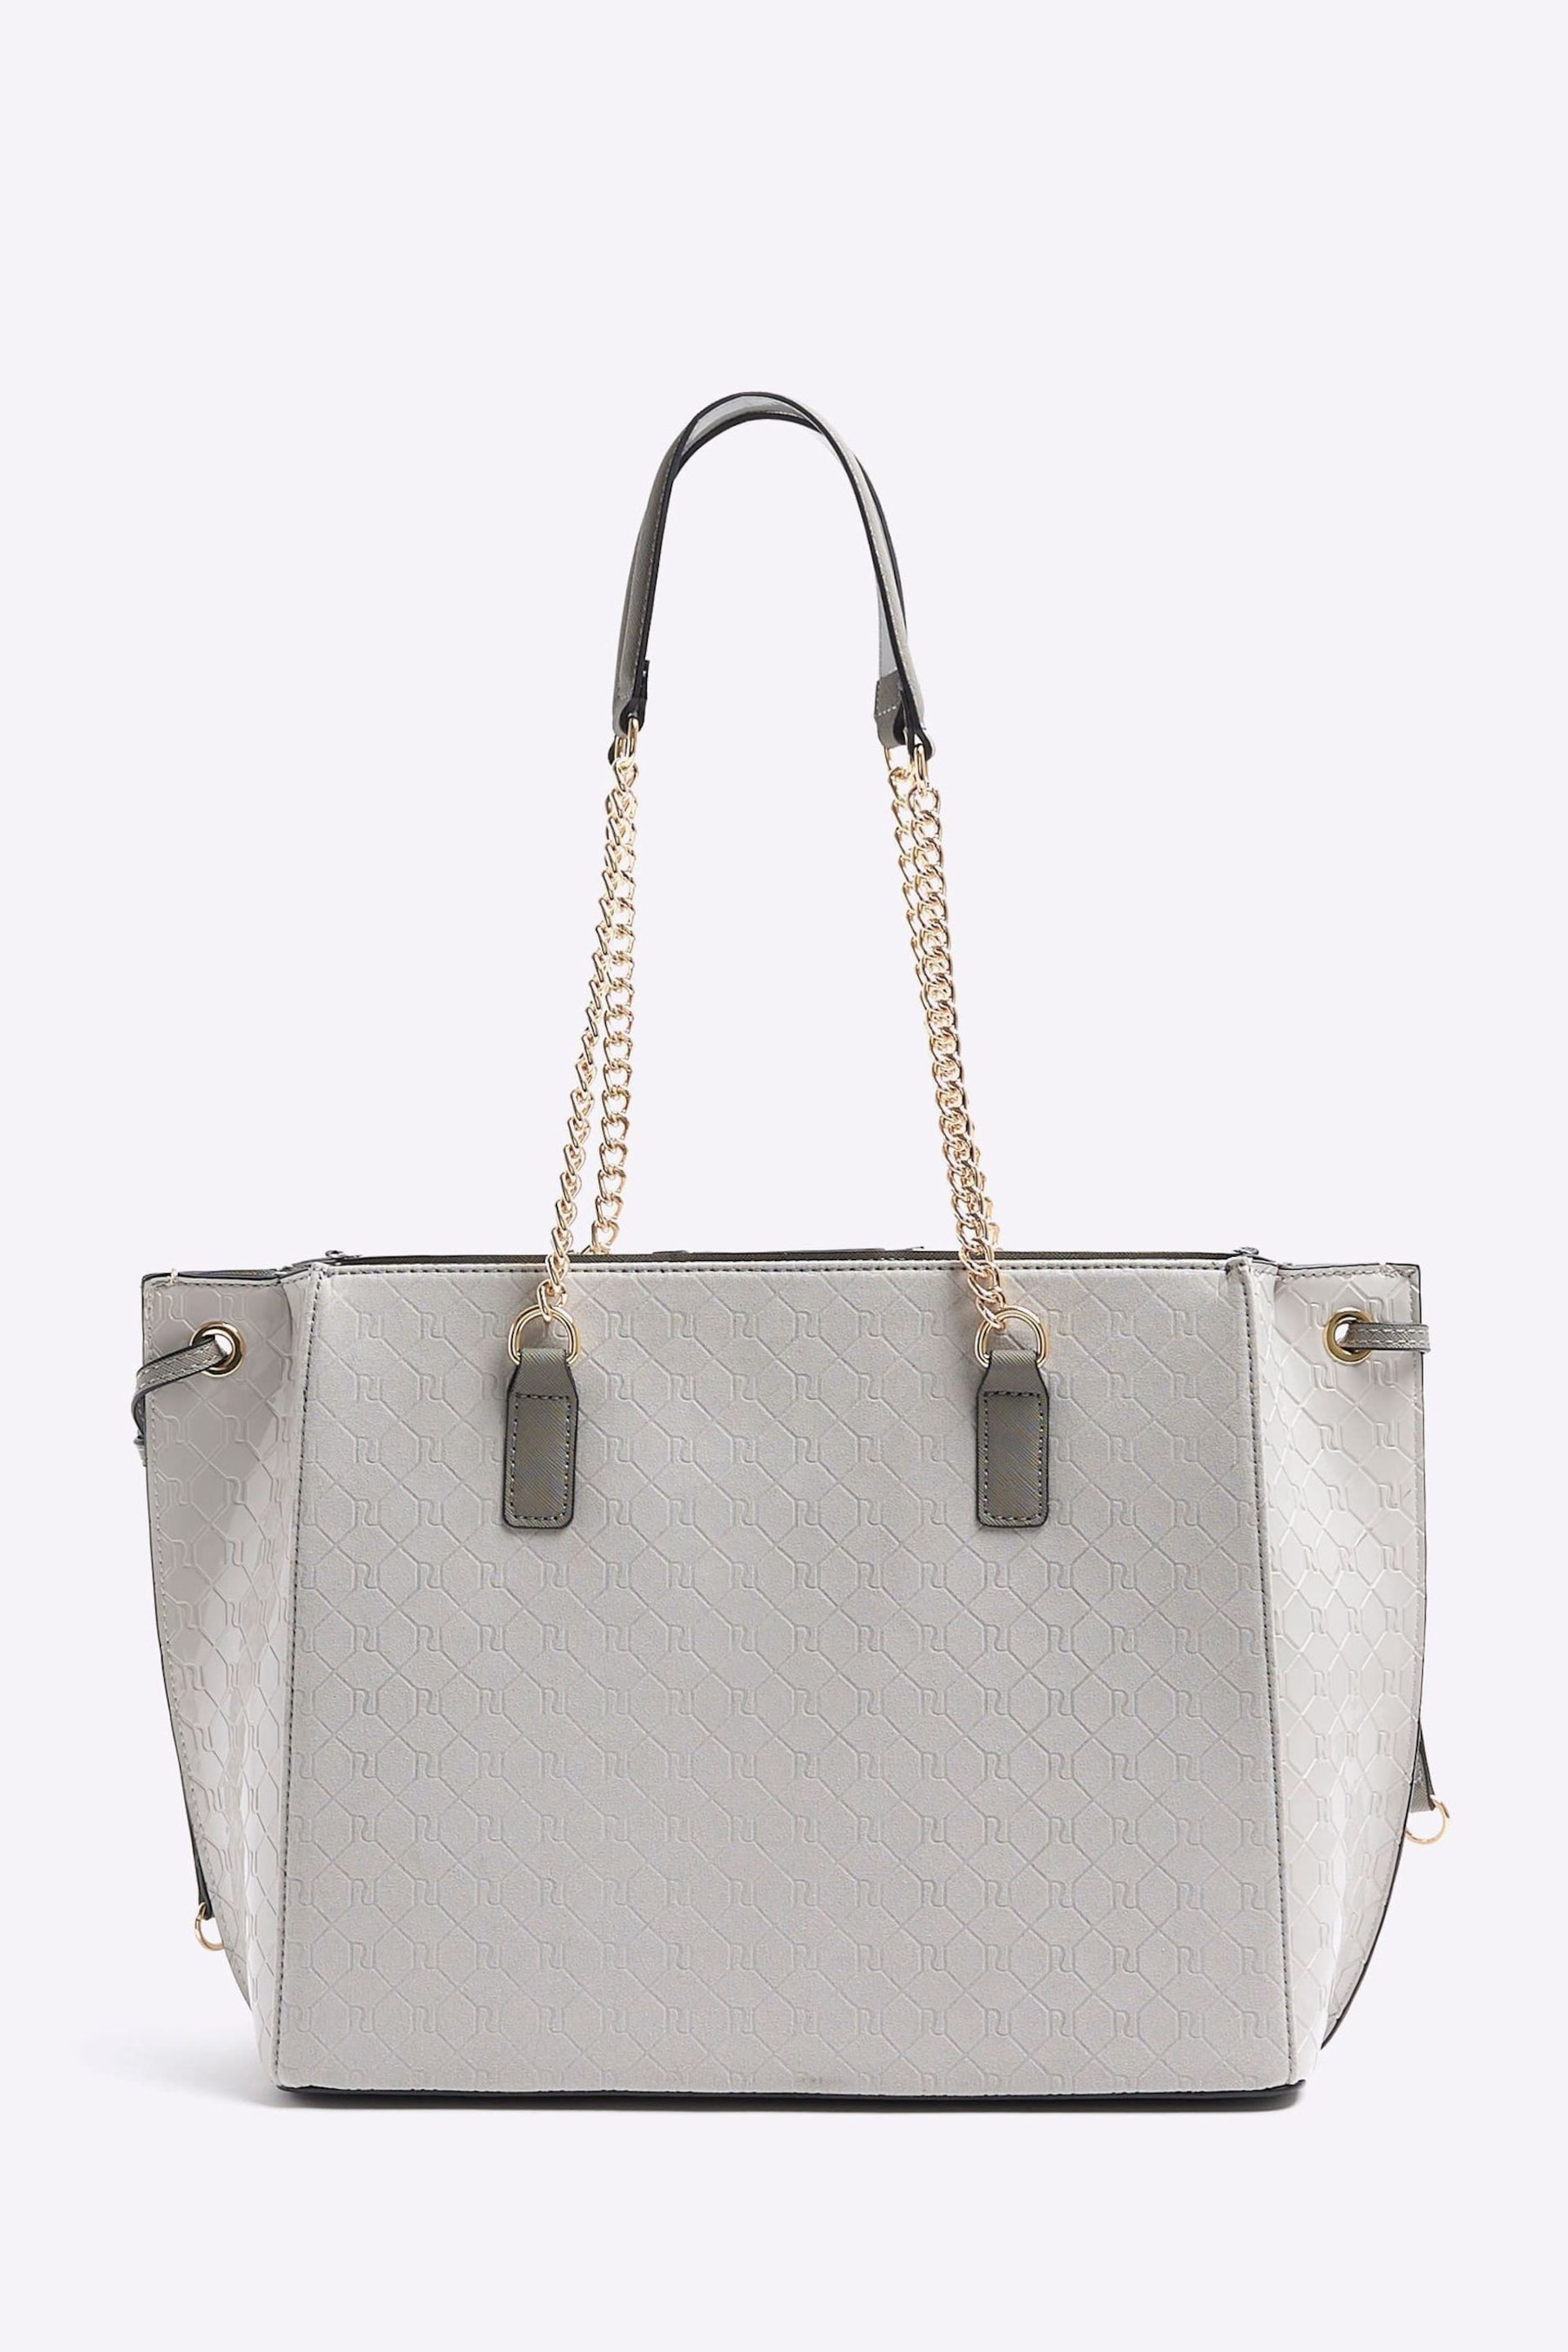 River Island Grey Panelled Wing Tote Bag - Image 2 of 4